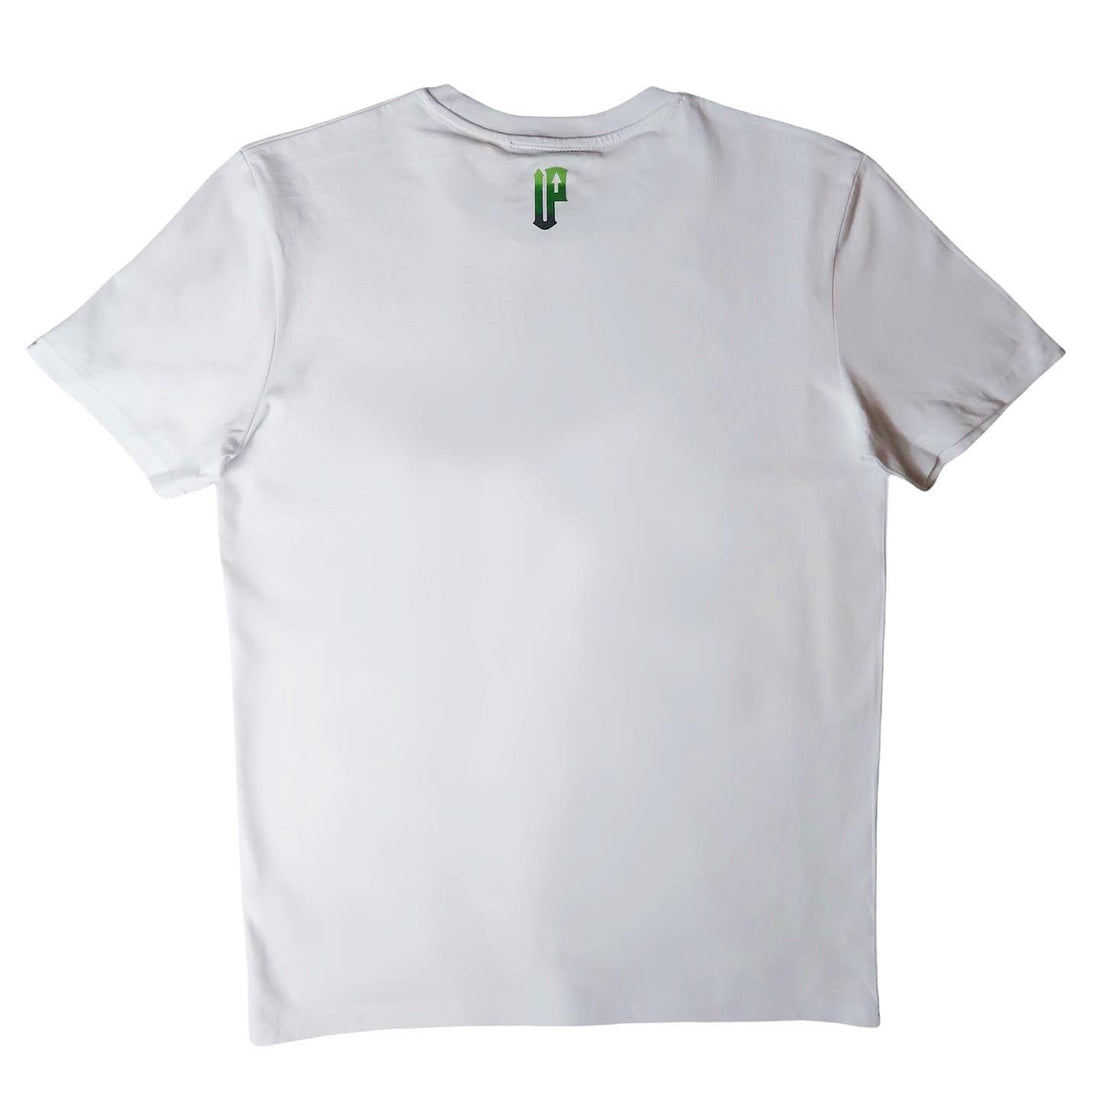 Double Up T-Shirt - White/Green